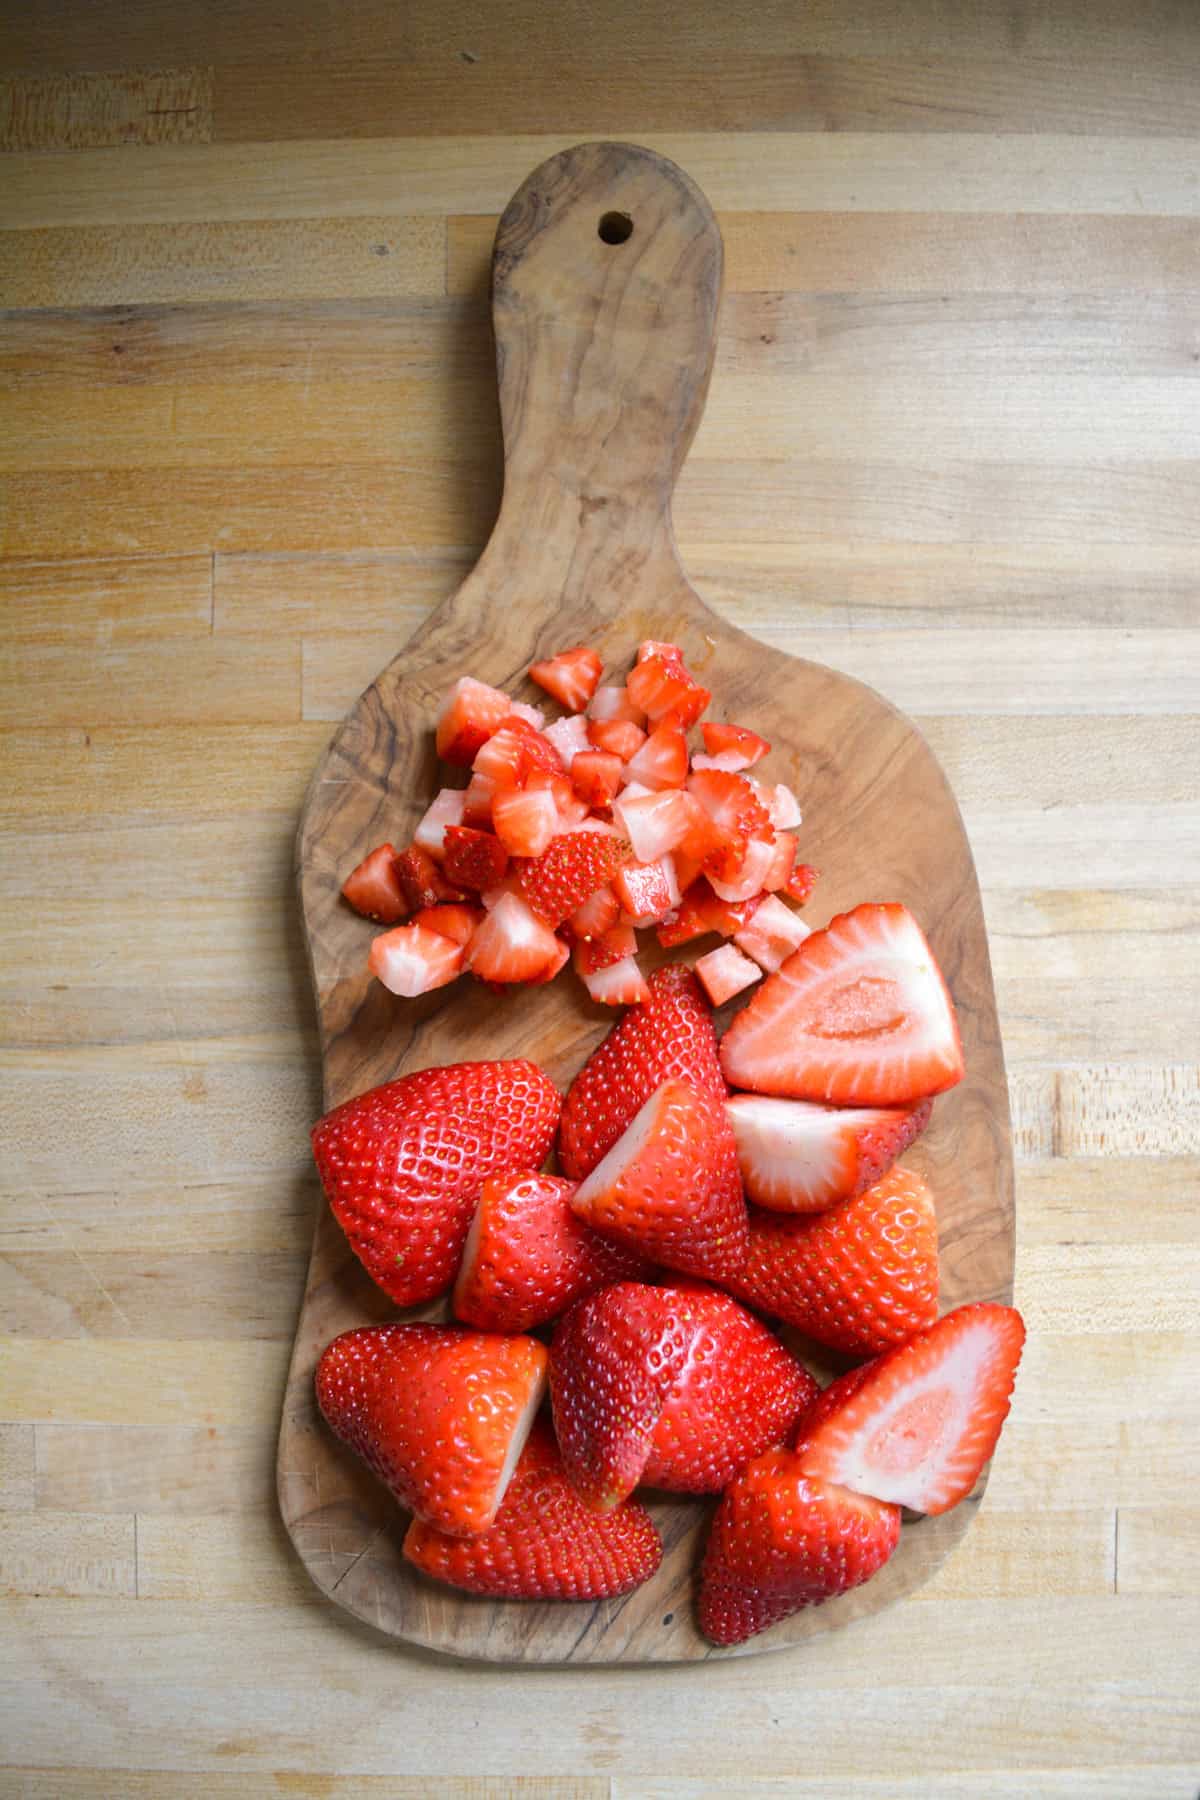 Strawberries on a small wooden cutting board. Some are sliced in half and some are chopped.